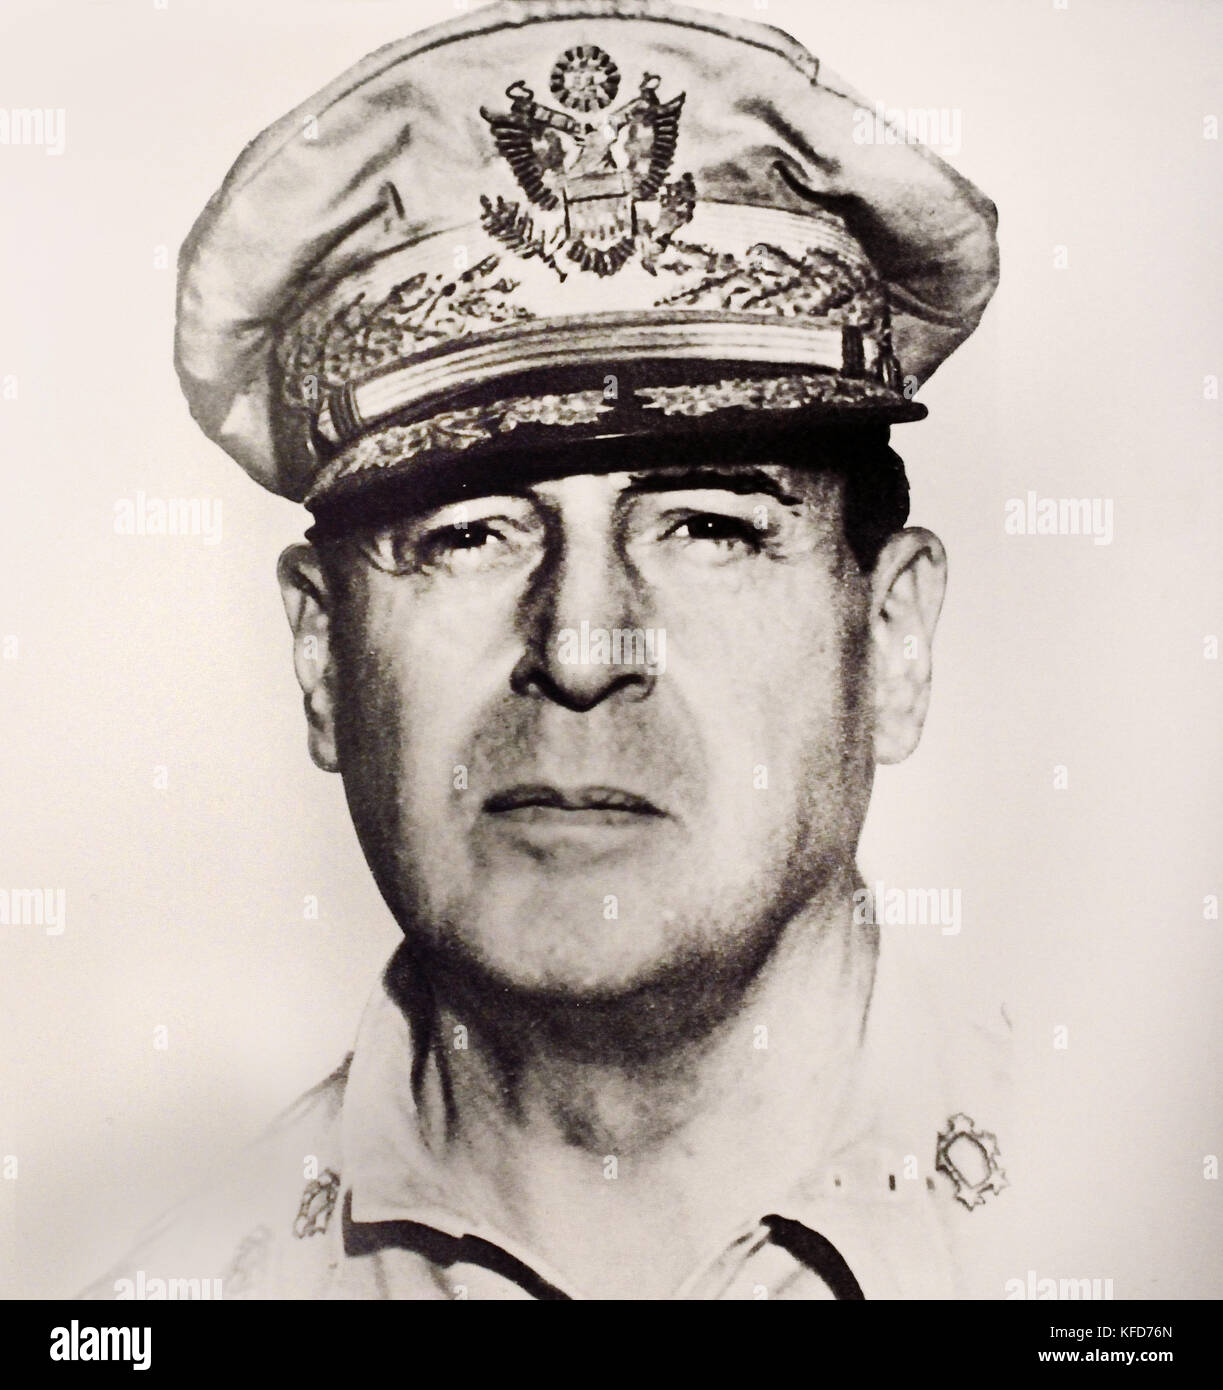 US General Douglas MacArthur World War II ( Douglas MacArthur 1880 –  1964 was an American five-star general and Field Marshal of the Philippine Army. He was Chief of Staff of the United States Army during the 1930s and played a prominent role in the Pacific theater during World War II. ) Stock Photo